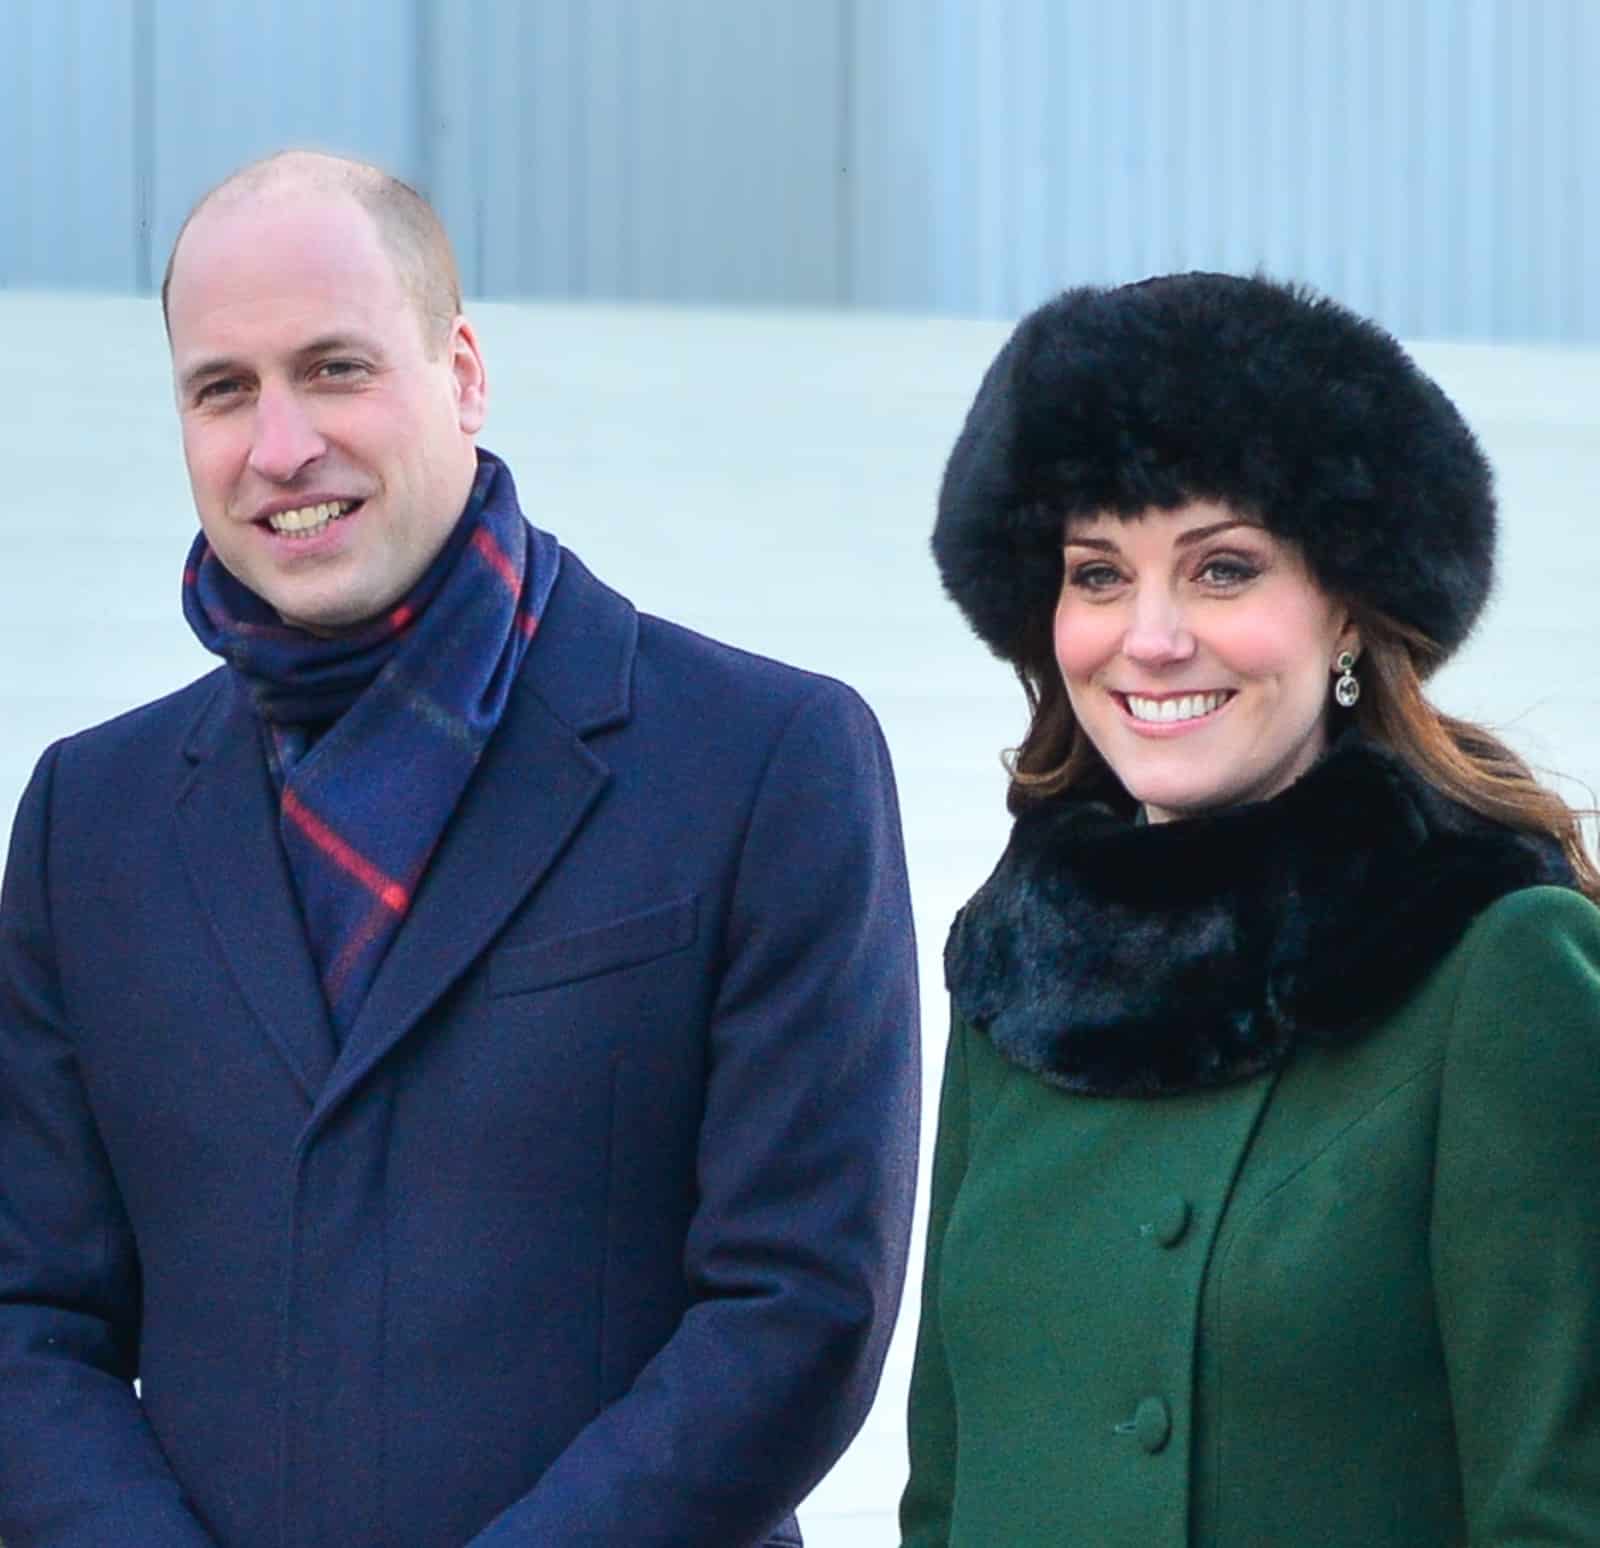 Prince William and his wife Princess Kate